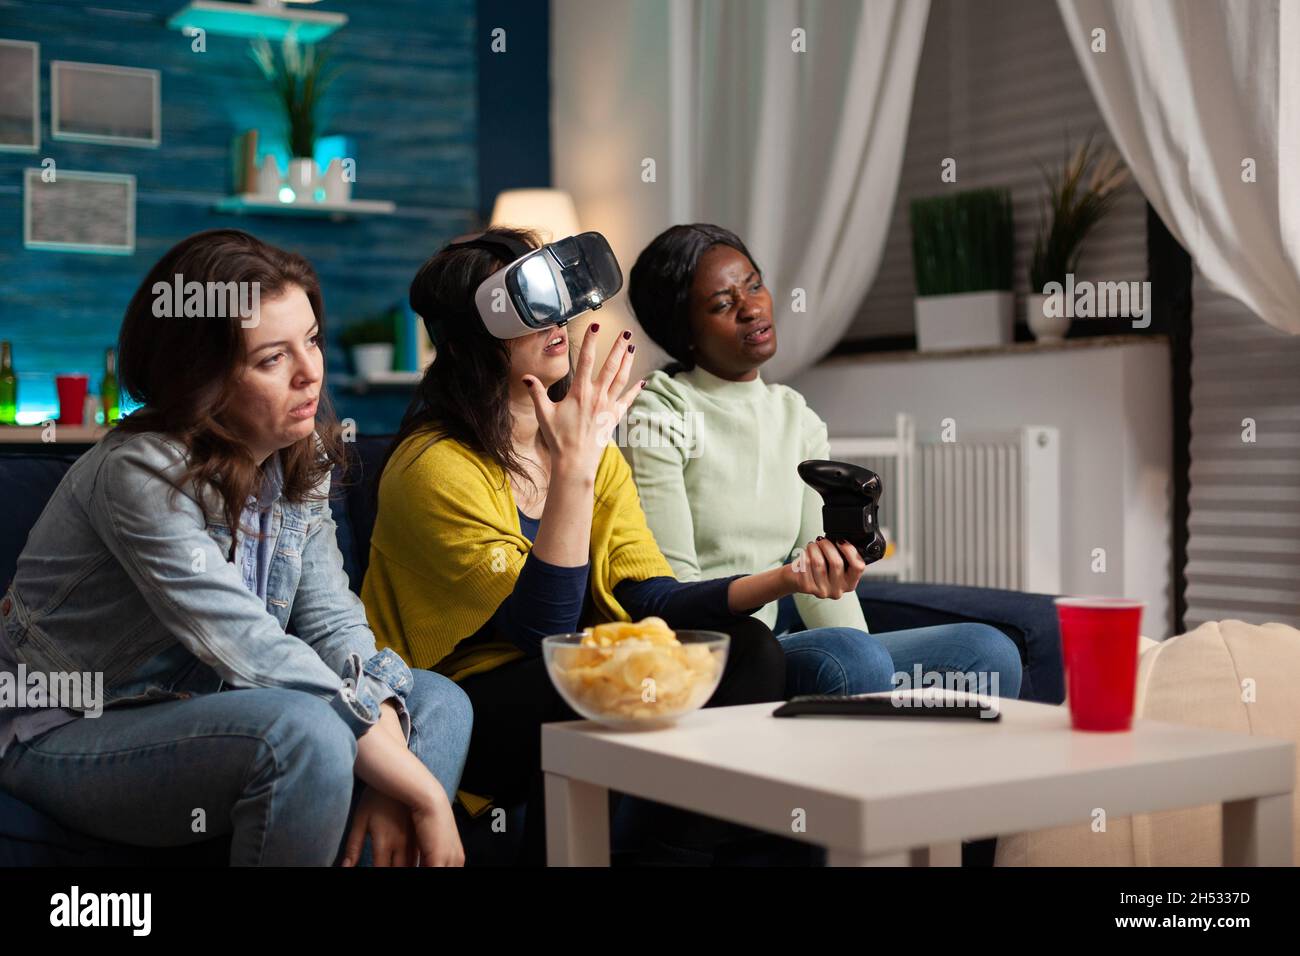 Sad nervous women friends sitting on couh playing online videogames using vr headset and joystick losing online competition. Multiethnic people enjoying hanging out together making fun activity Stock Photo